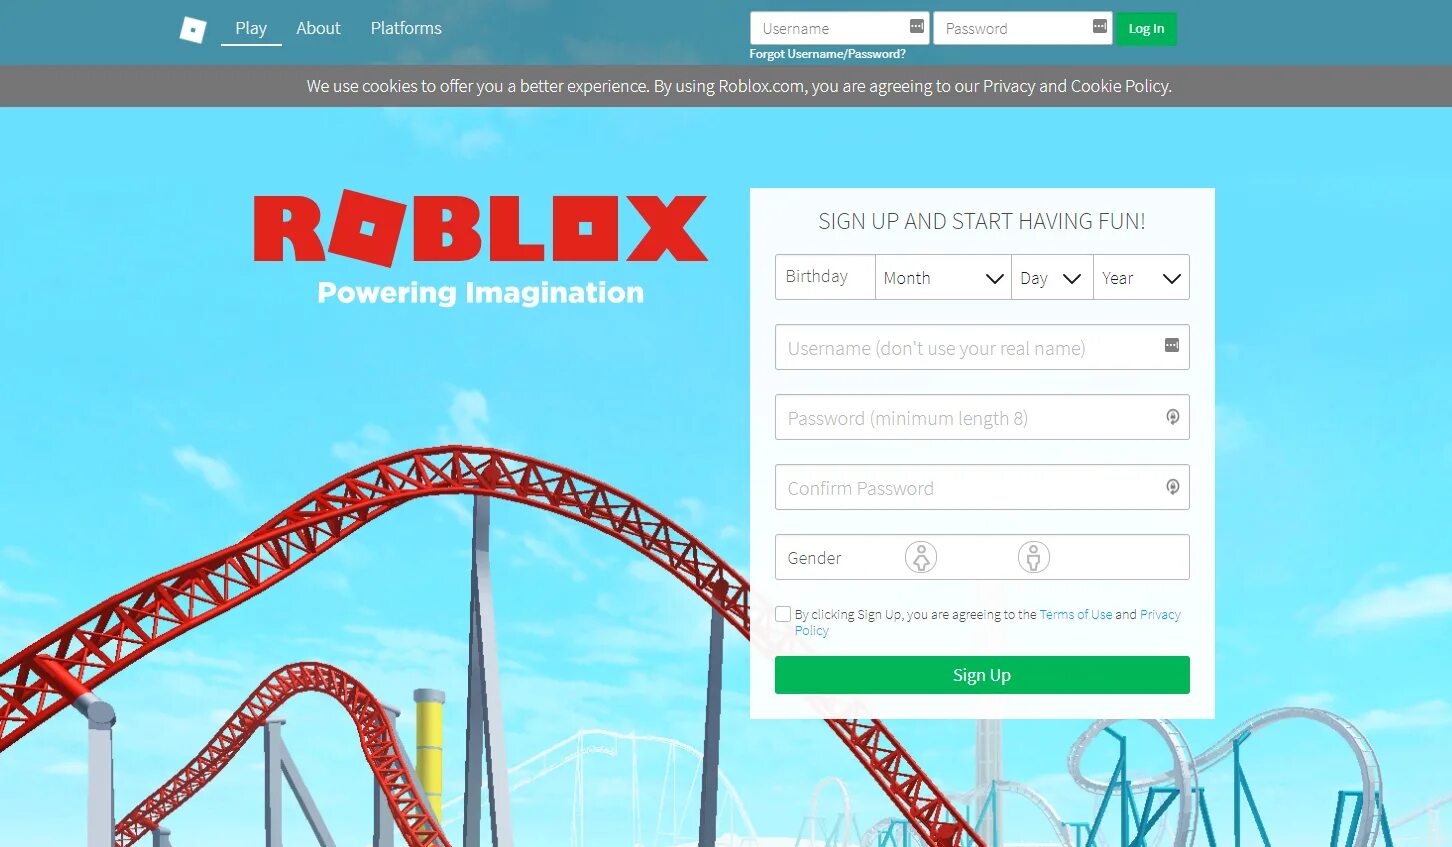 Roblox sign. РОБЛОКС sign up. Roblox Sing up. Веб сайт РОБЛОКС. Sign up game